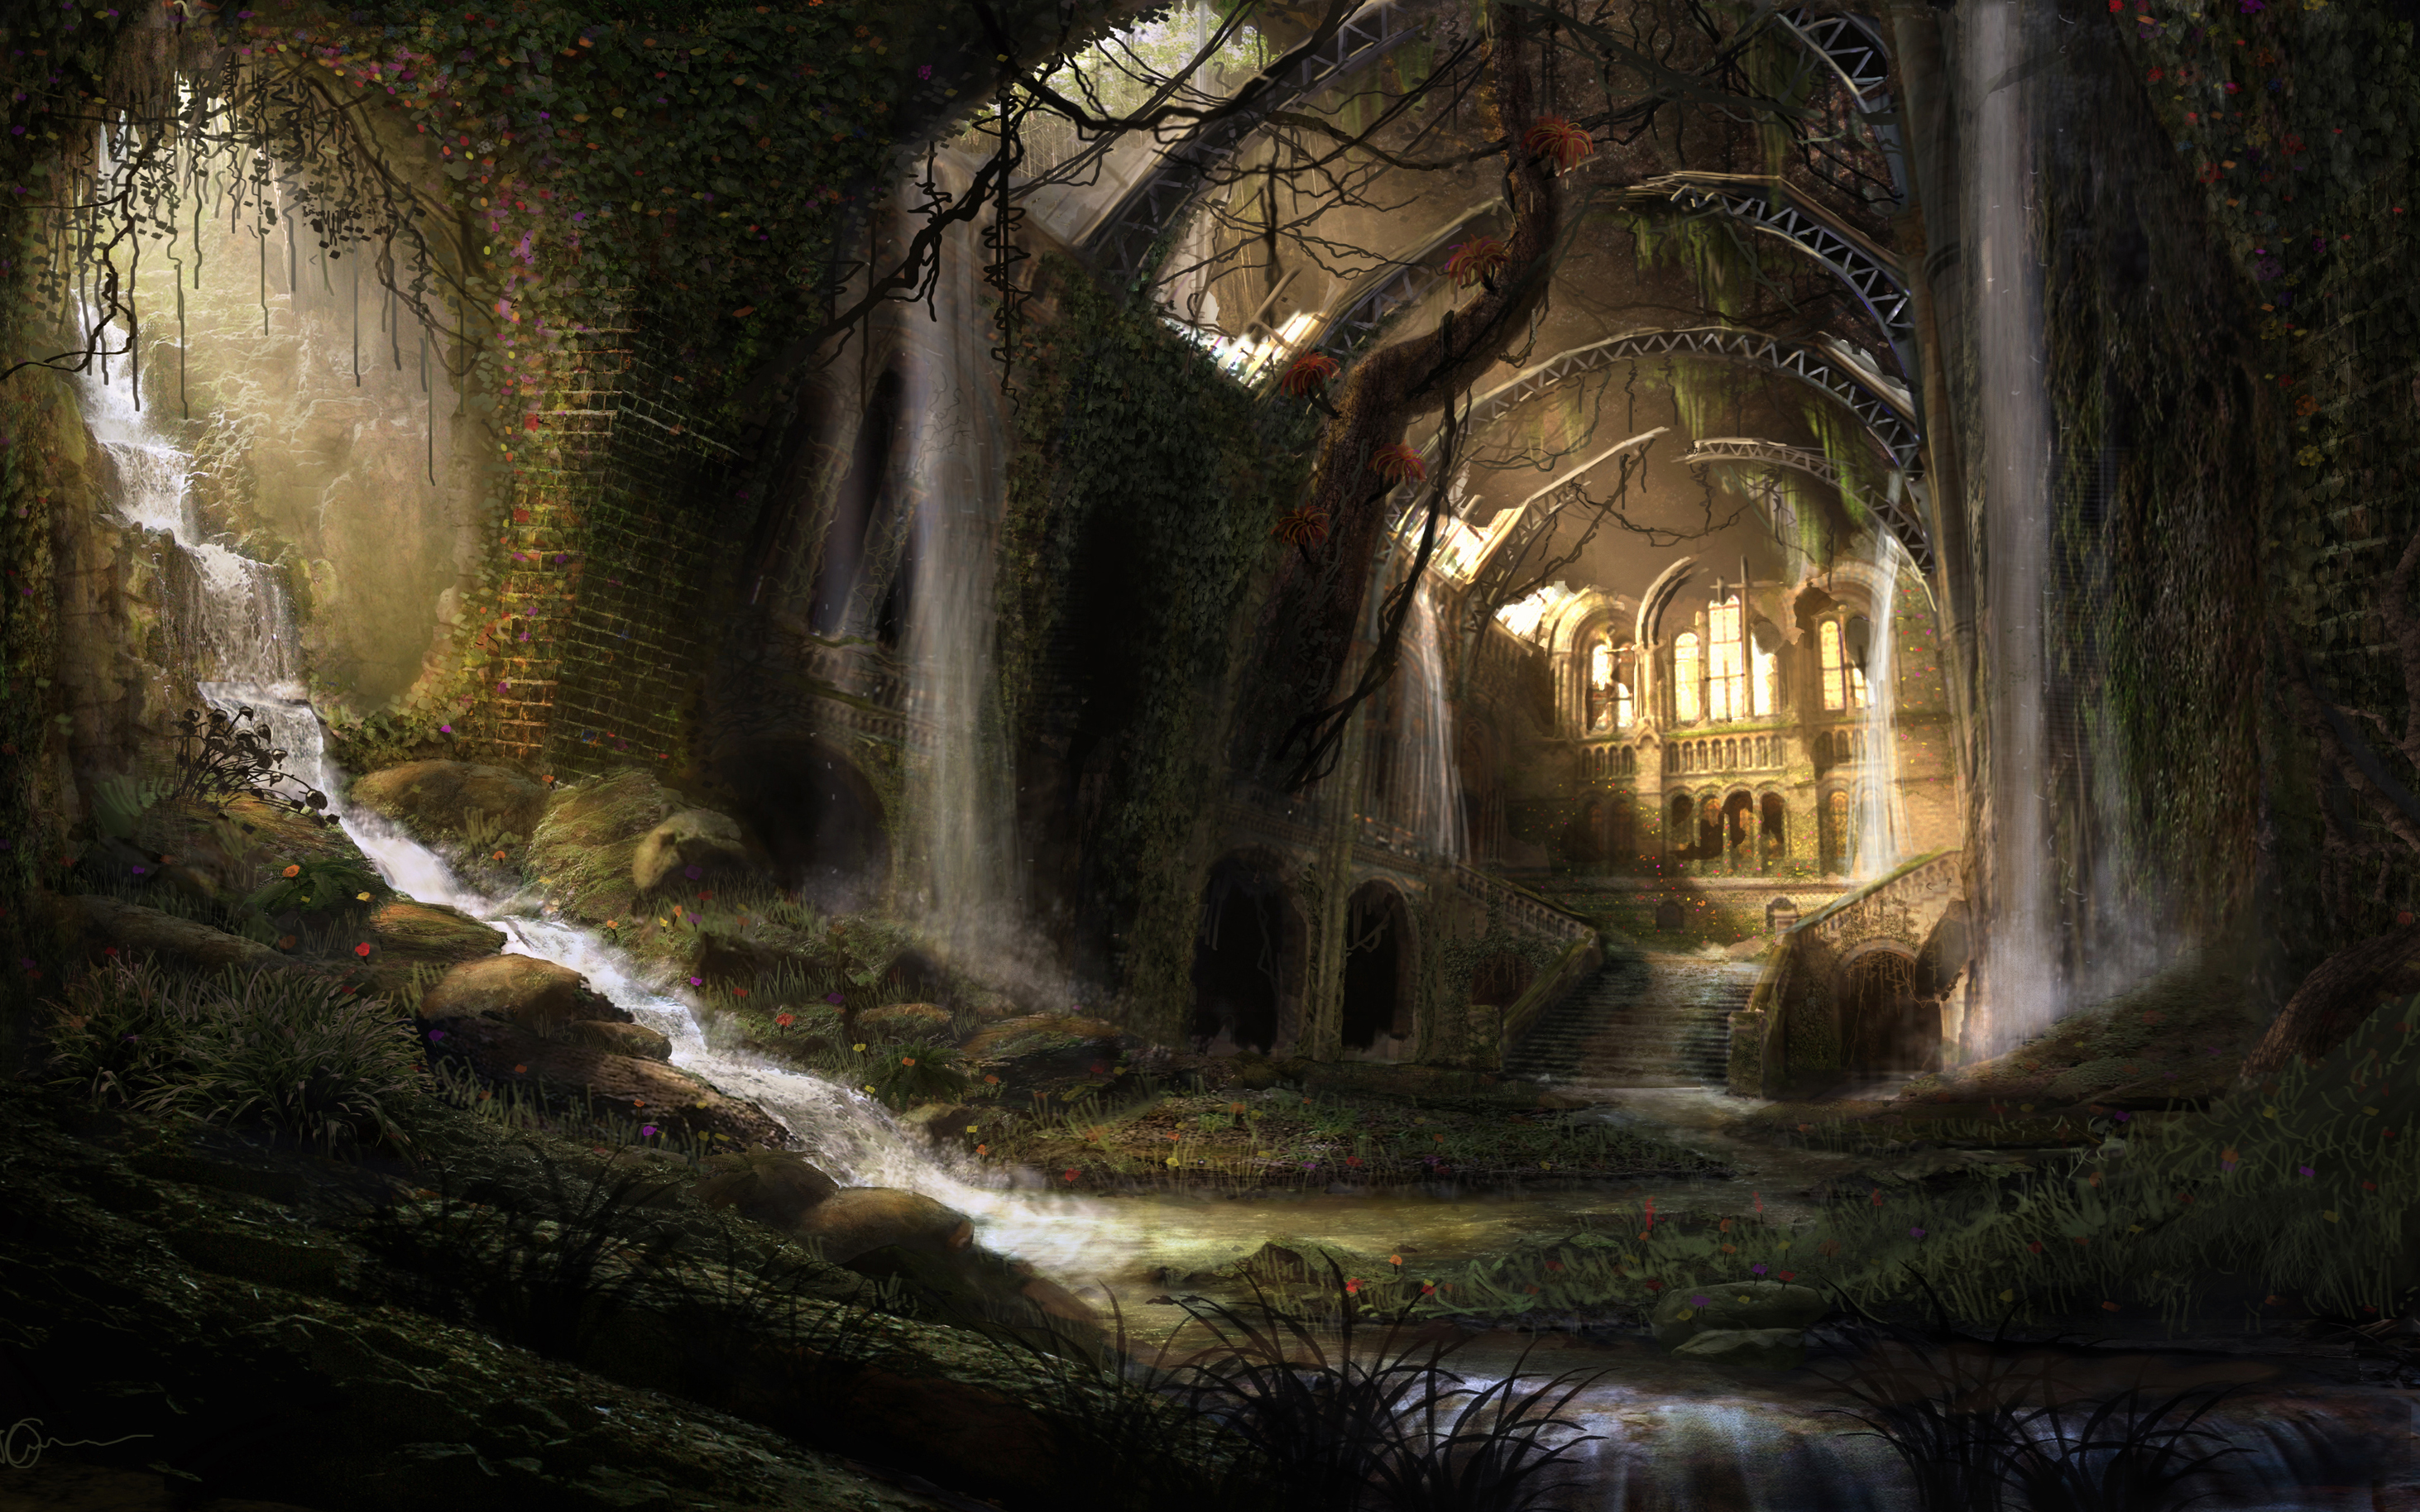 Nature's Reclaimed: Stunning waterfall in high definition by Matthew Moserum.